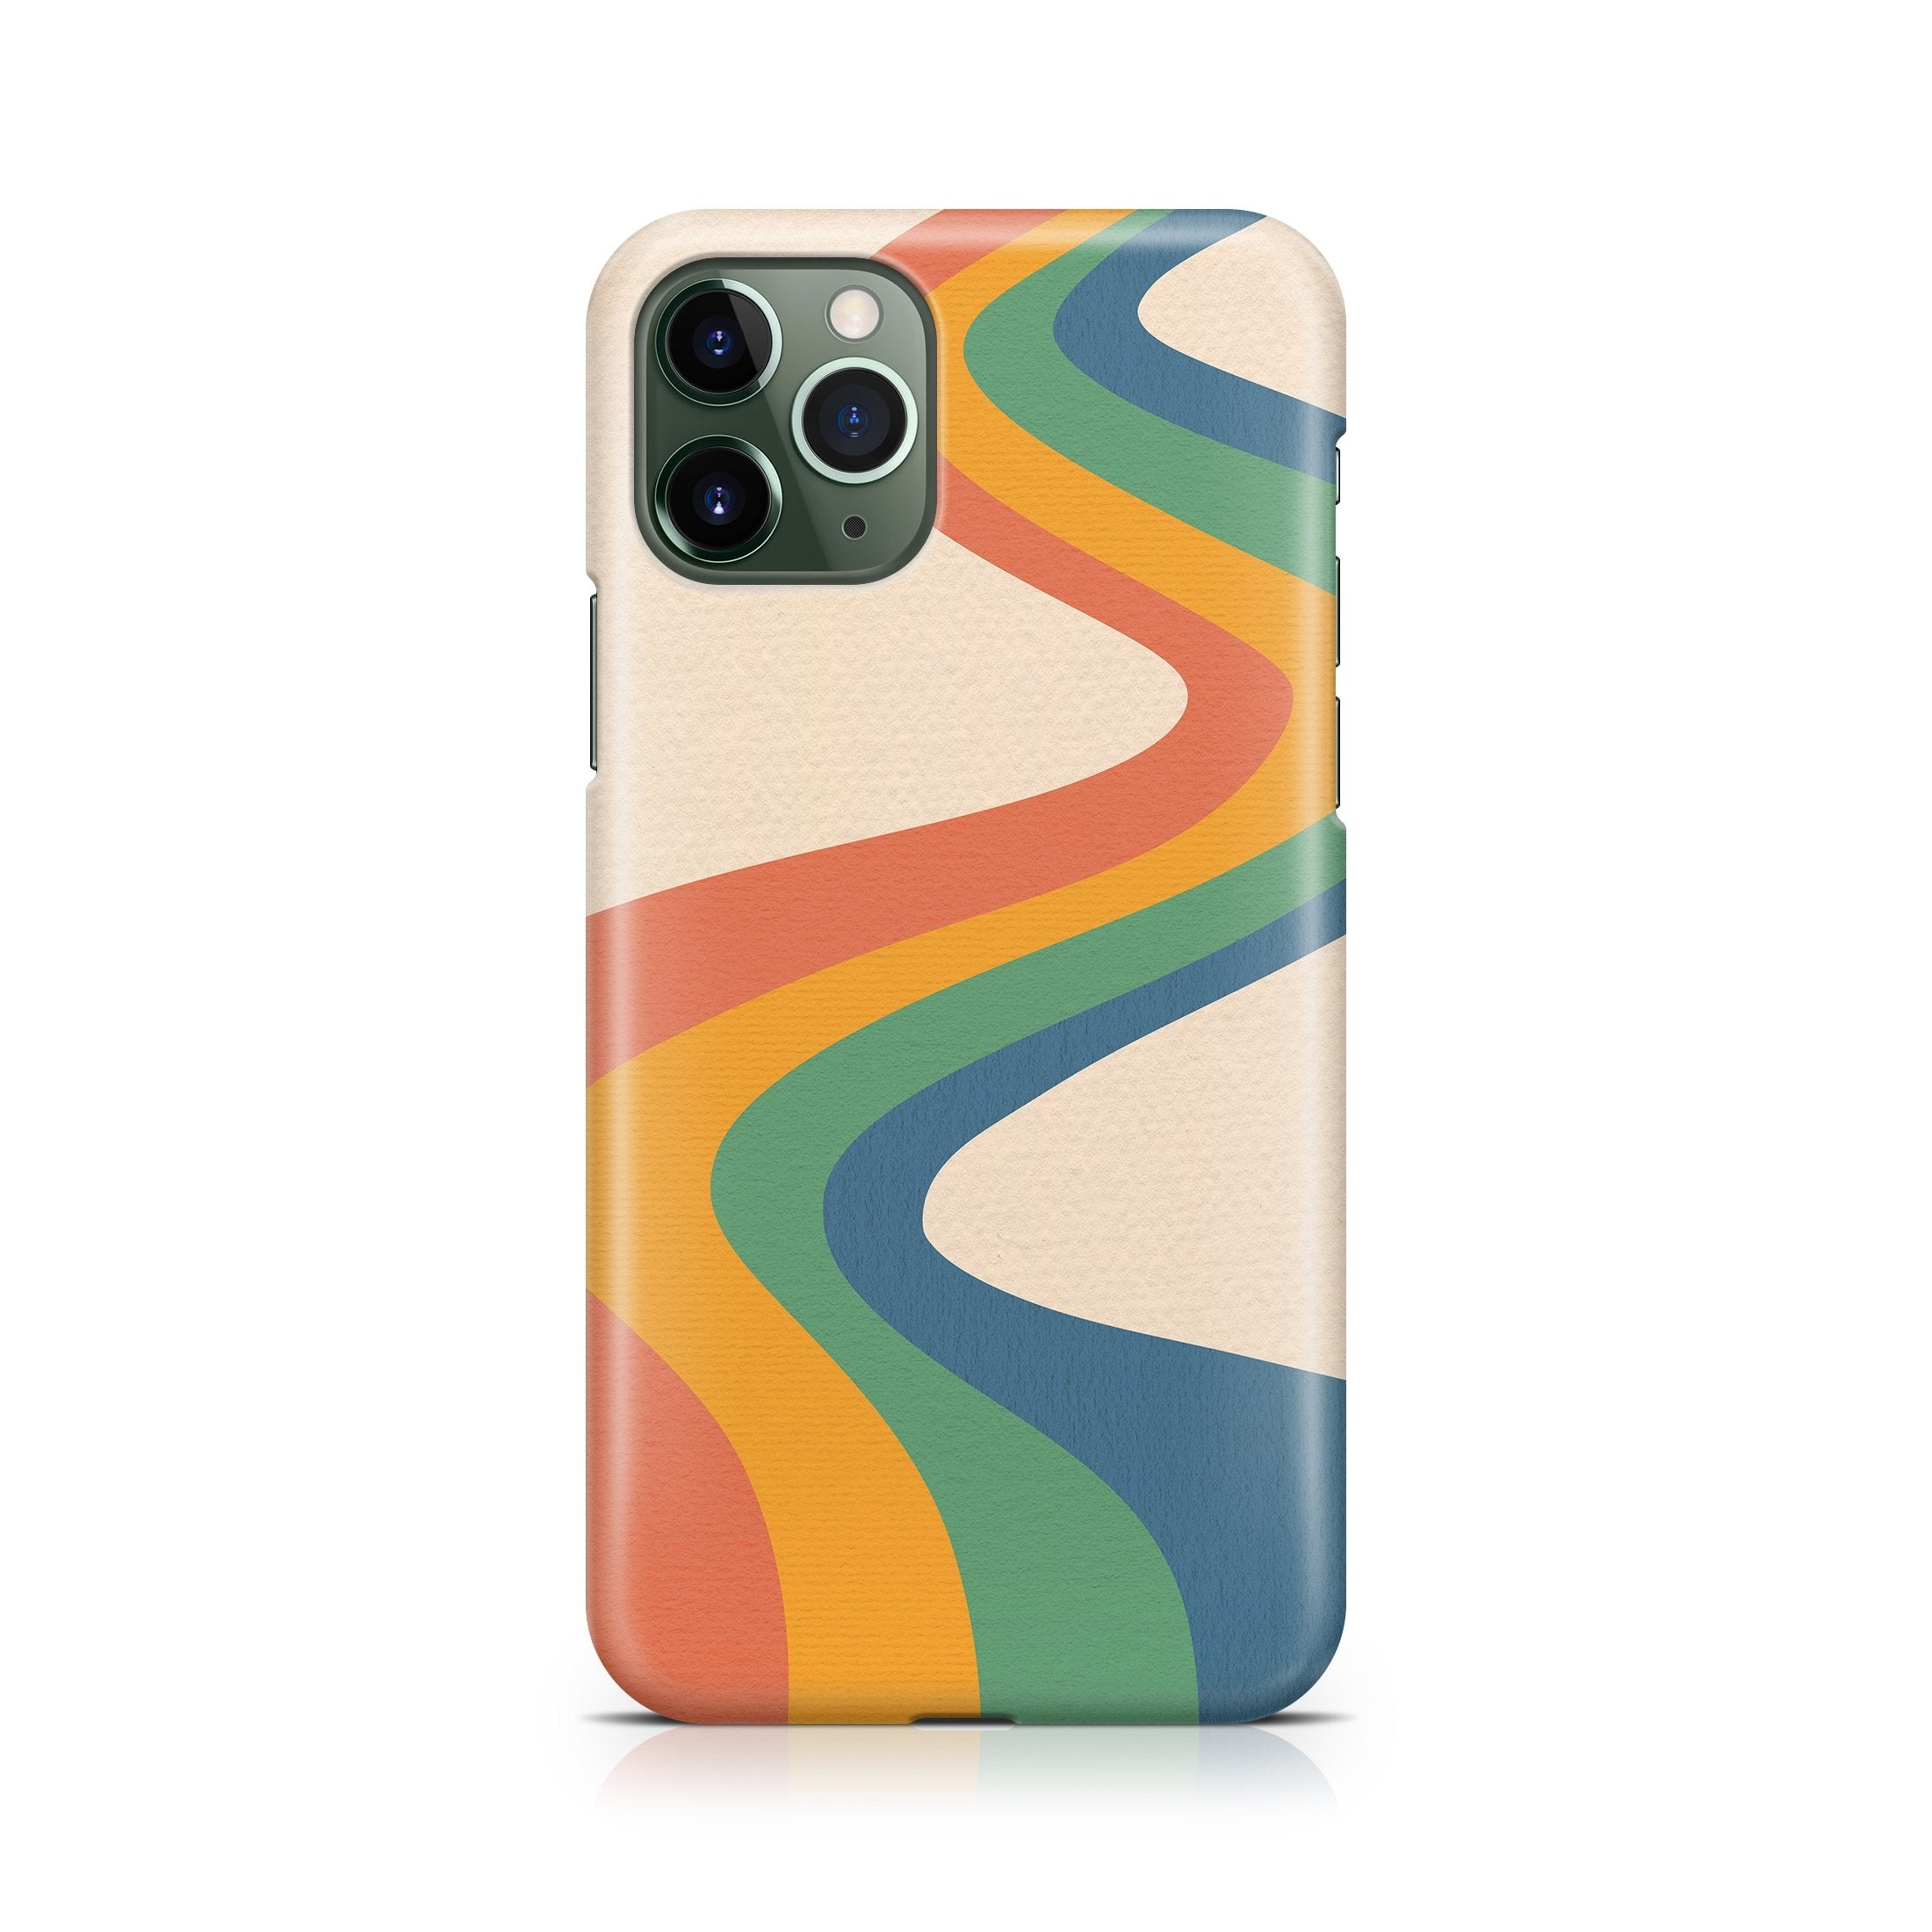 Slide into the Past - iPhone phone case designs by CaseSwagger